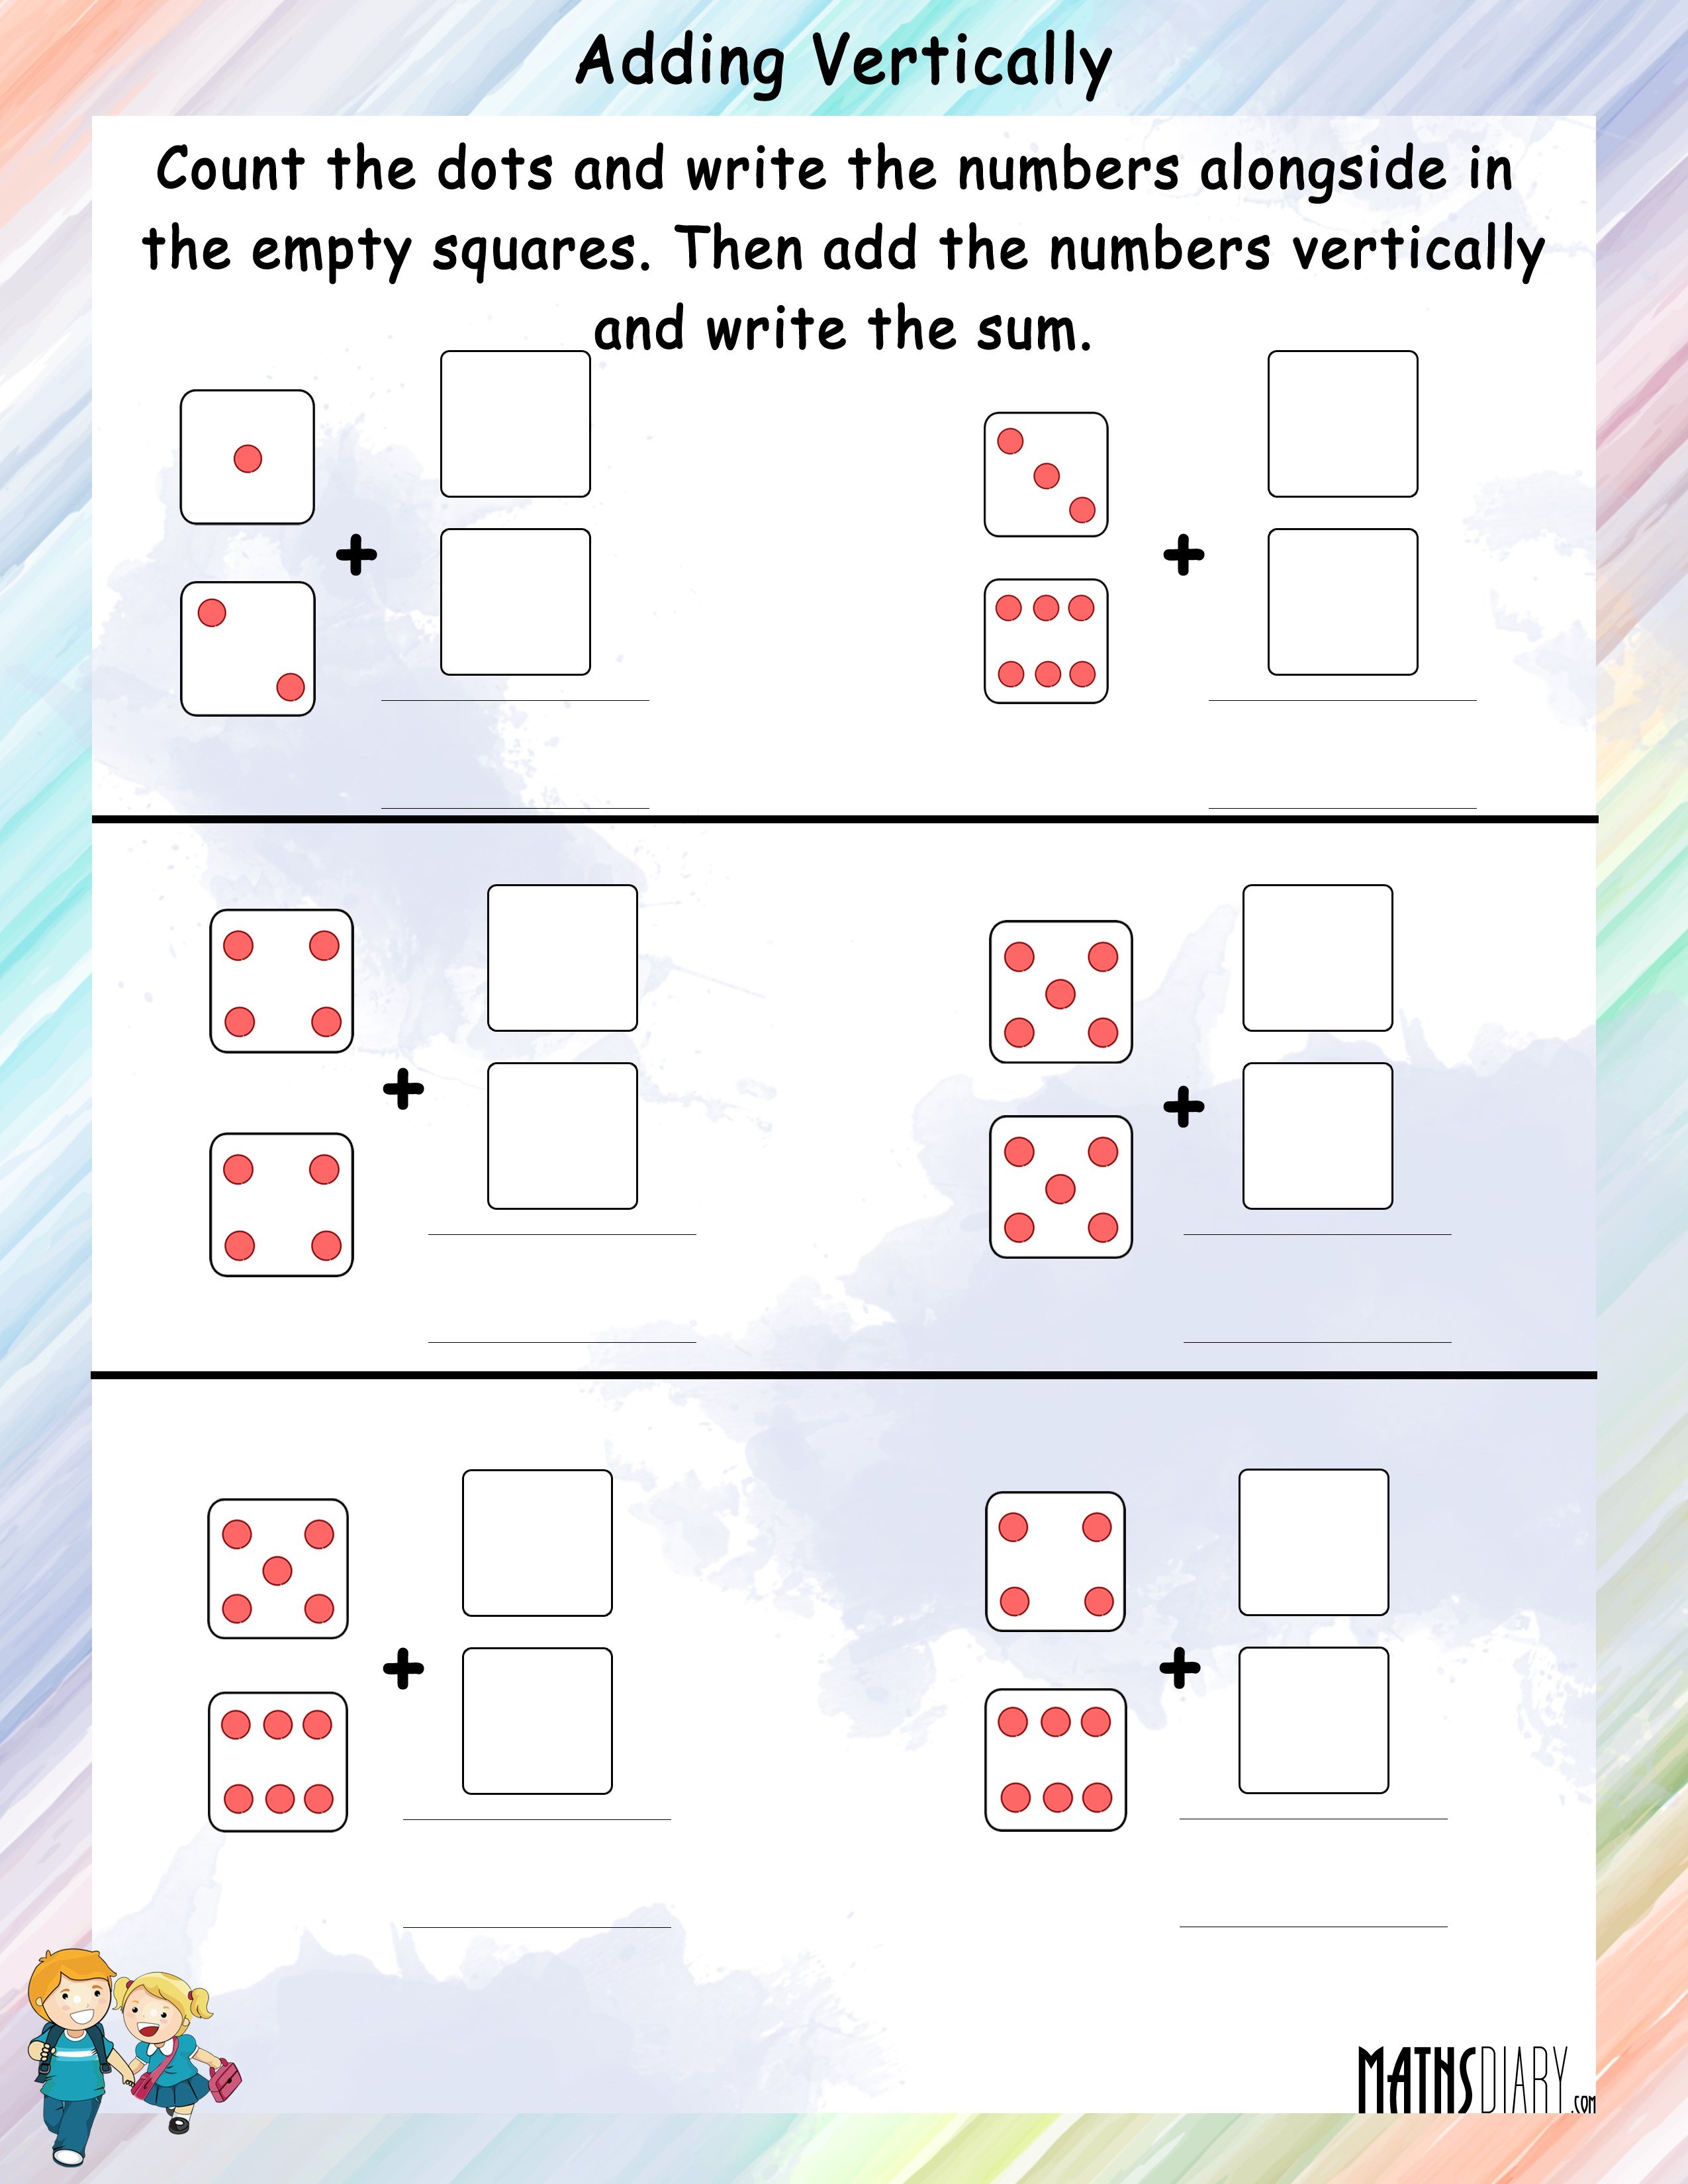 adding-vertically-vertical-addition-math-worksheets-mathsdiary